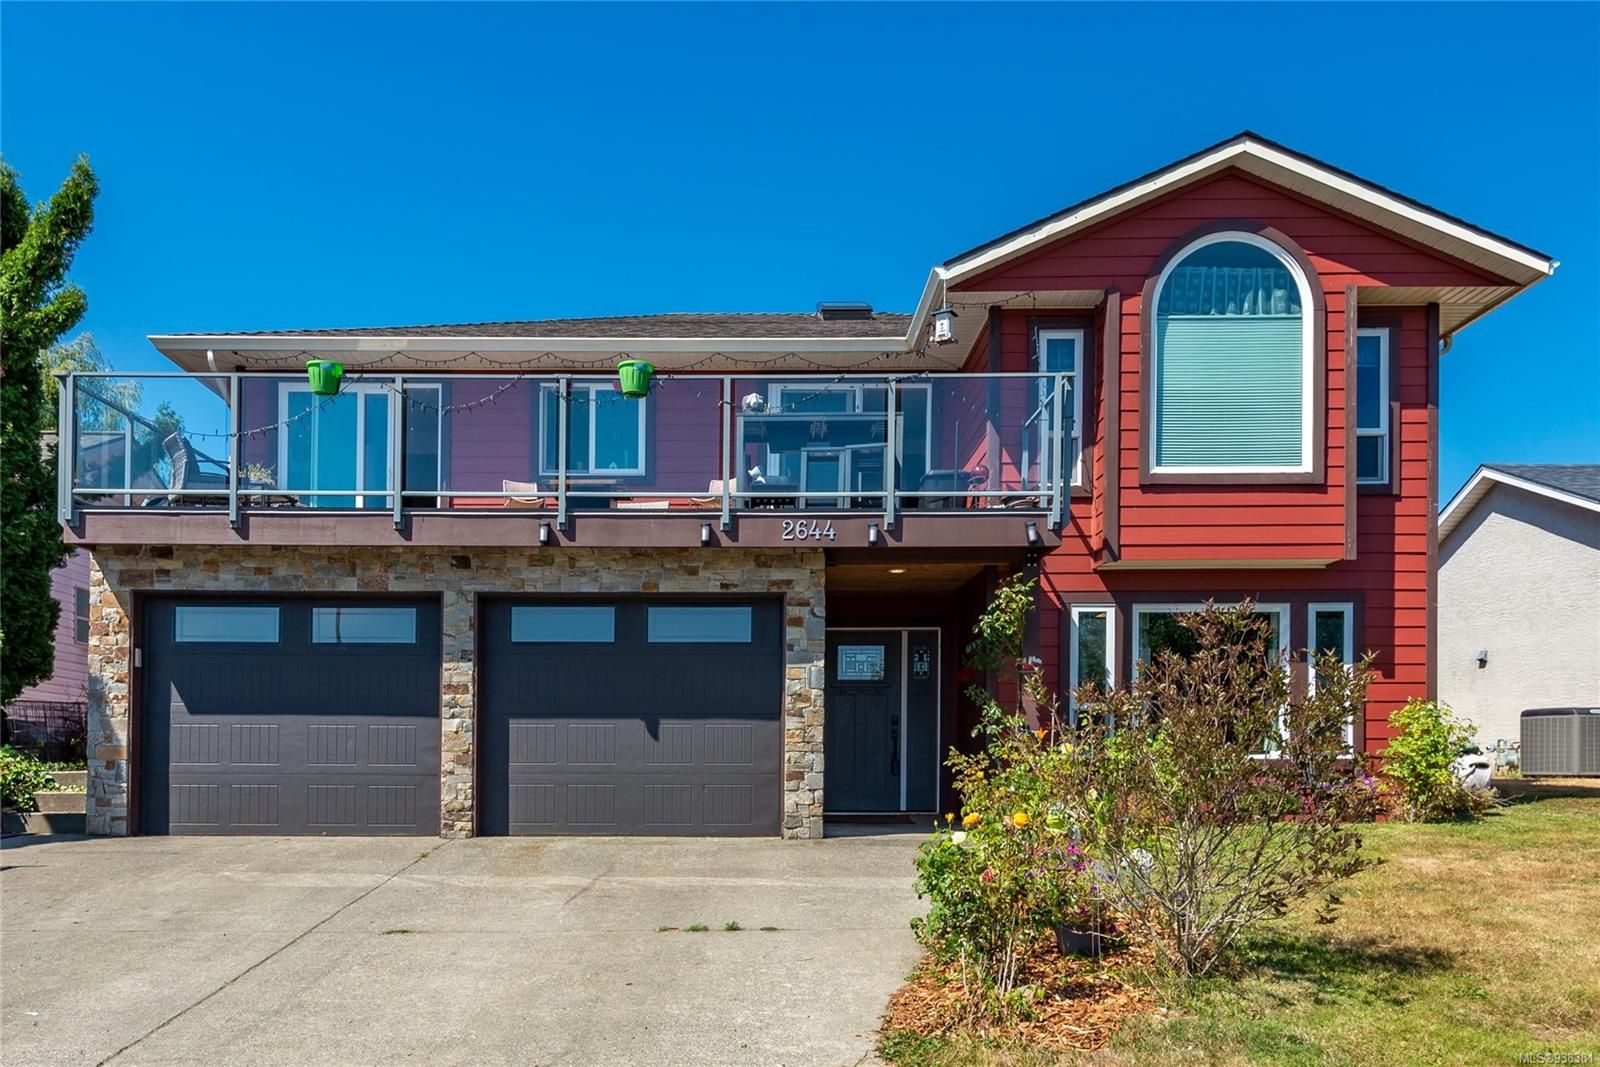 New property listed in CR Willow Point, Campbell River